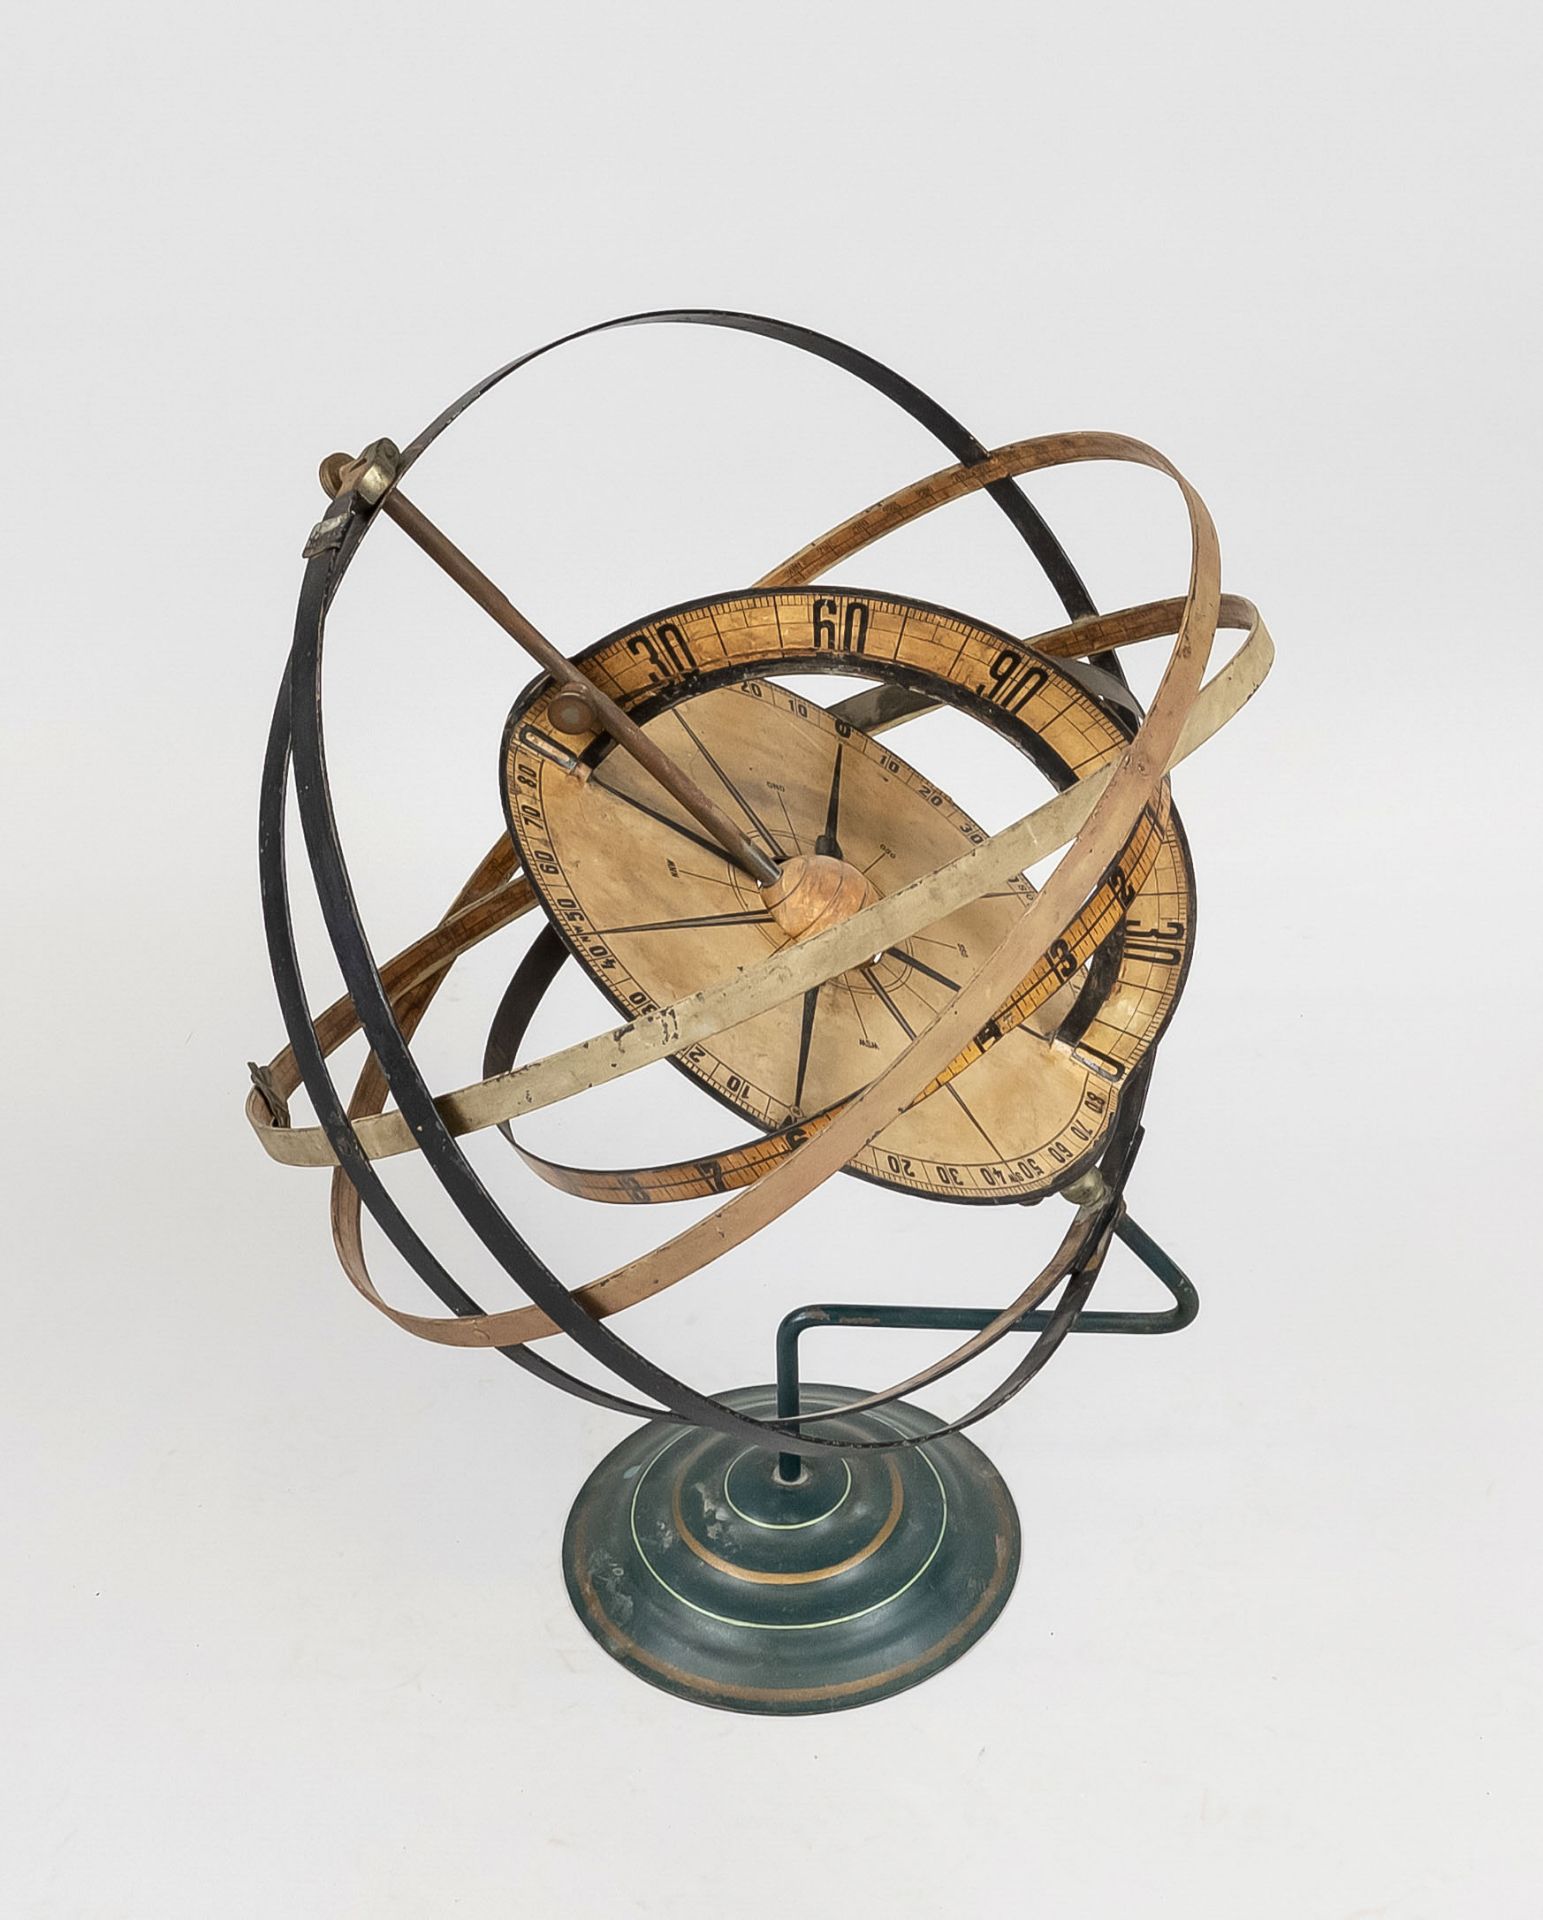 Armillary sphere/spherical astrolabe, probably end of 19th century, iron, polychrome painted and - Image 2 of 2